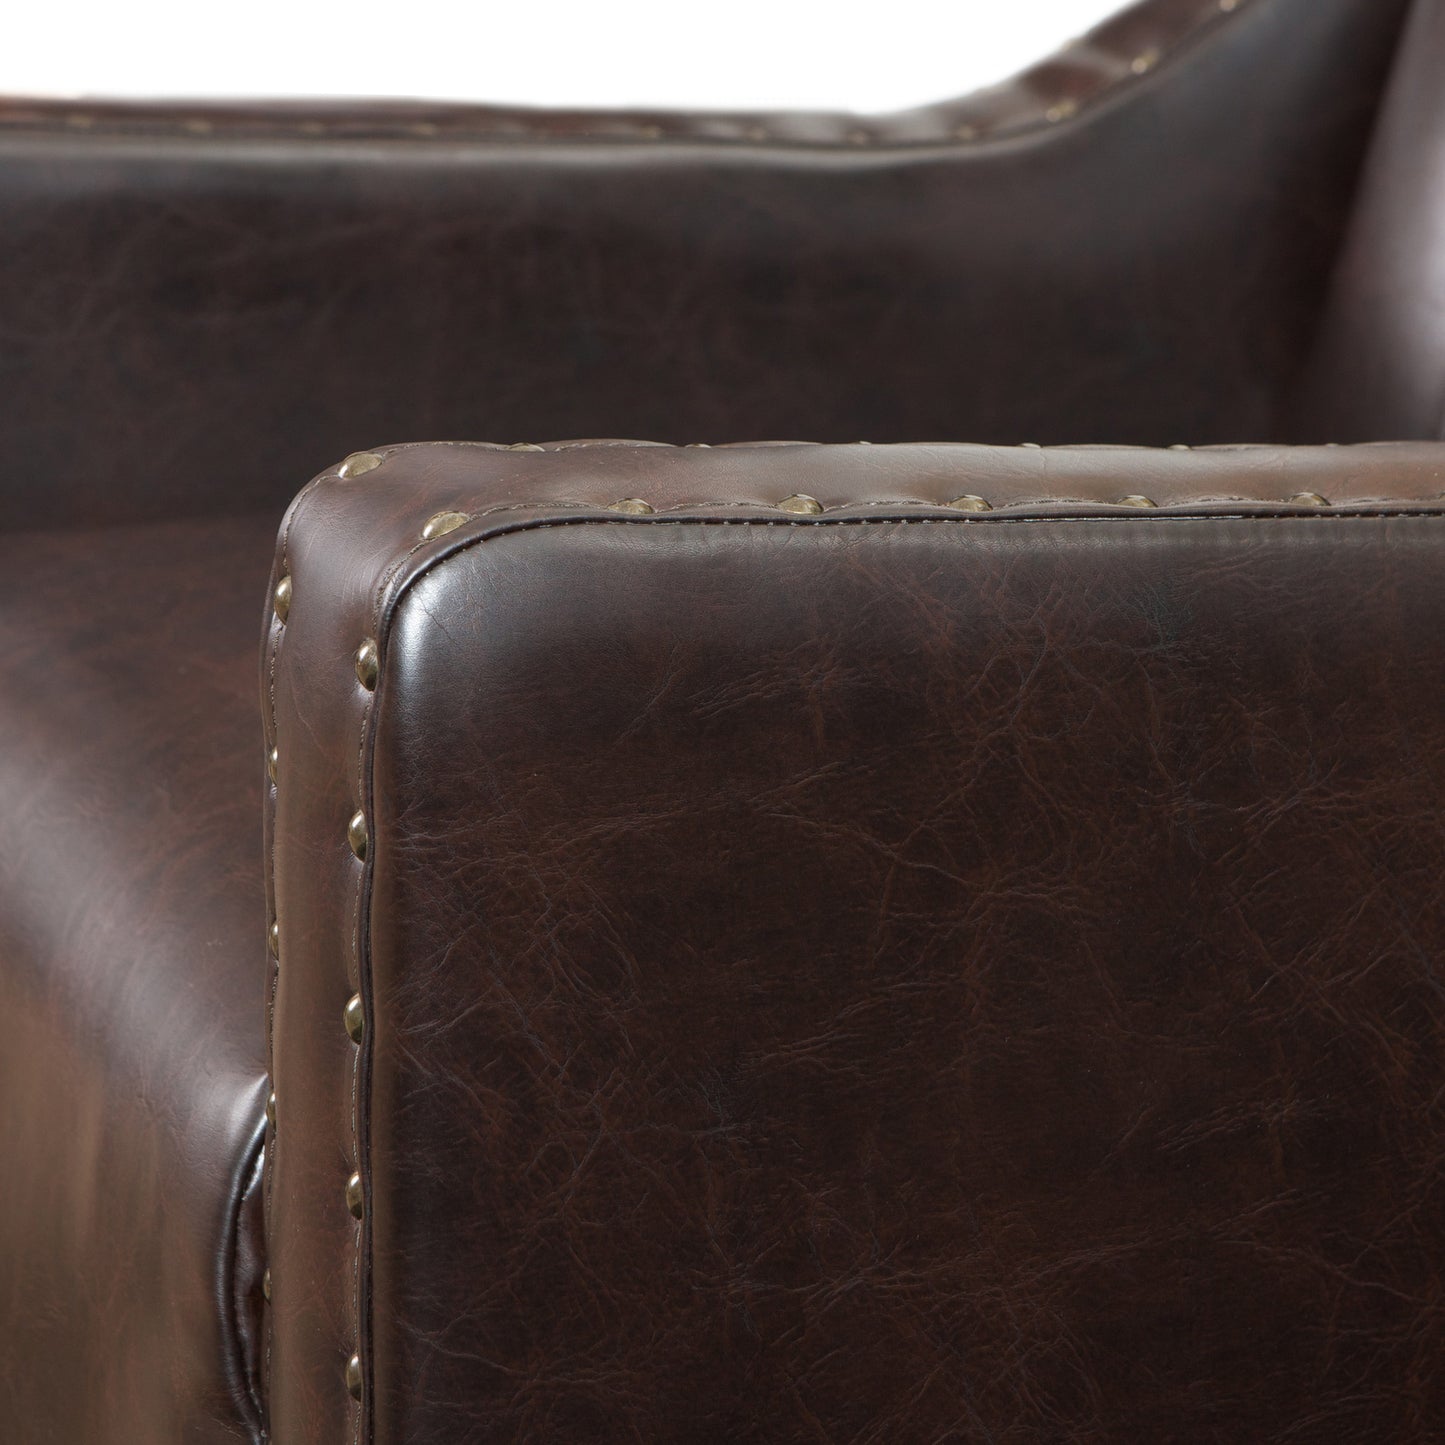 Coogee Bonded Leather Armchair & Ottoman in Brown